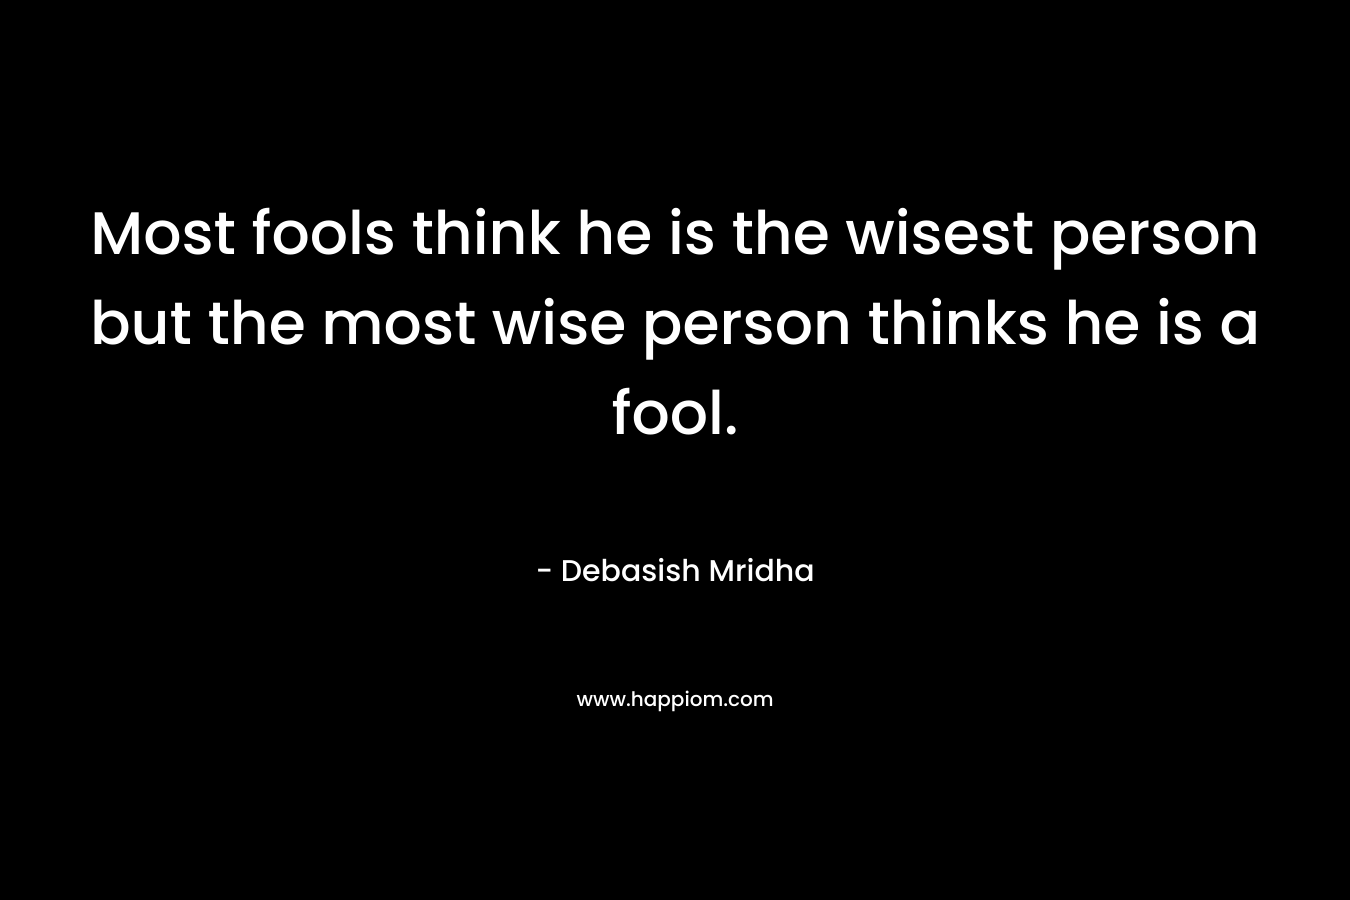 Most fools think he is the wisest person but the most wise person thinks he is a fool.